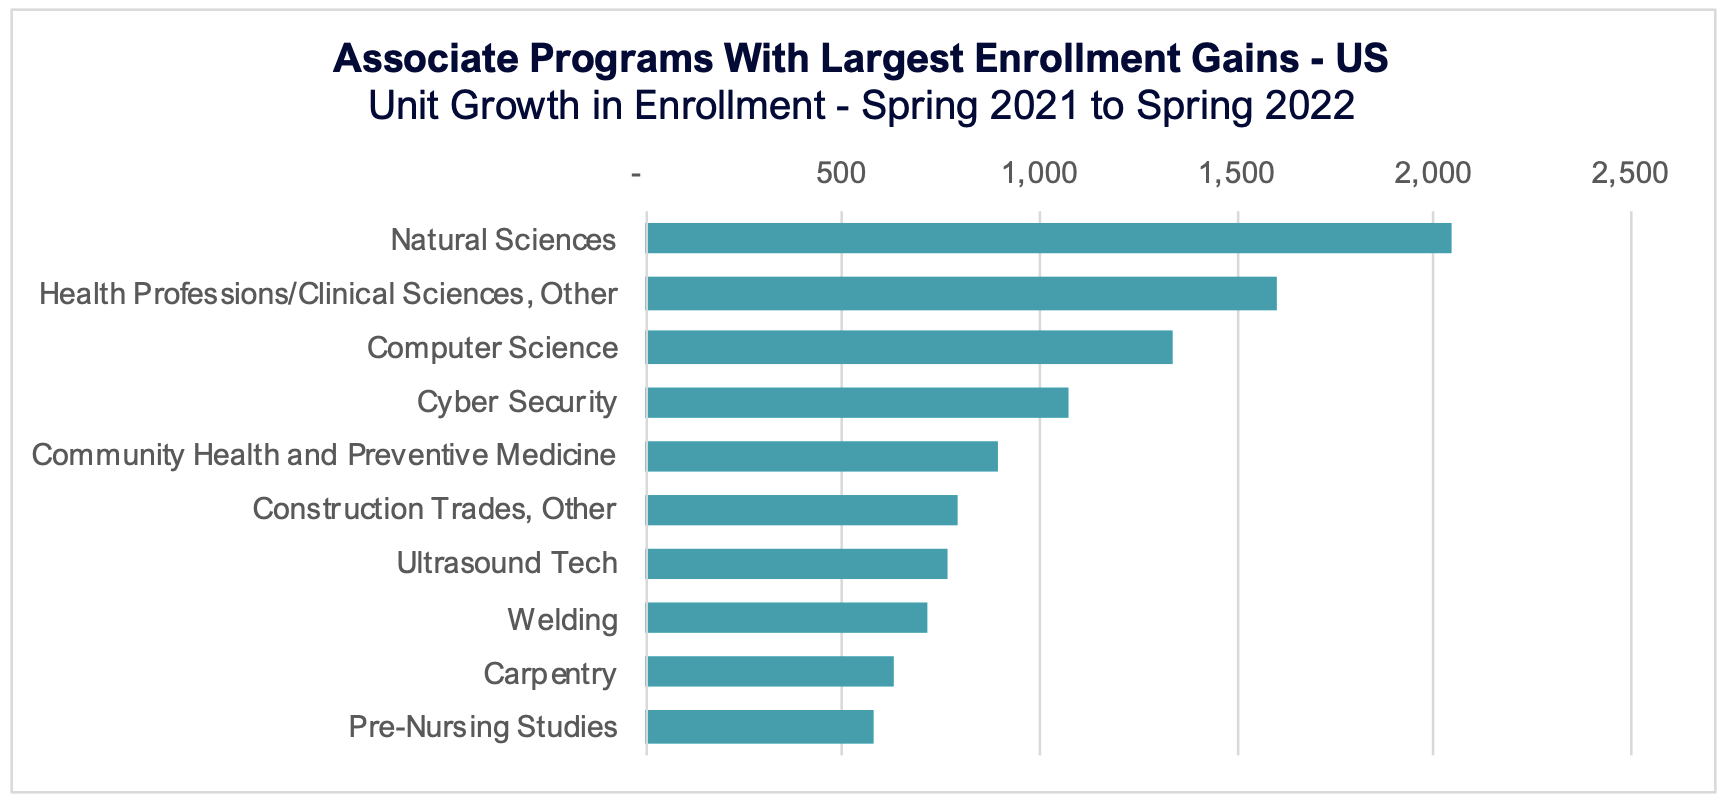 Associate Programs with Largest Enrollment Gains in the US